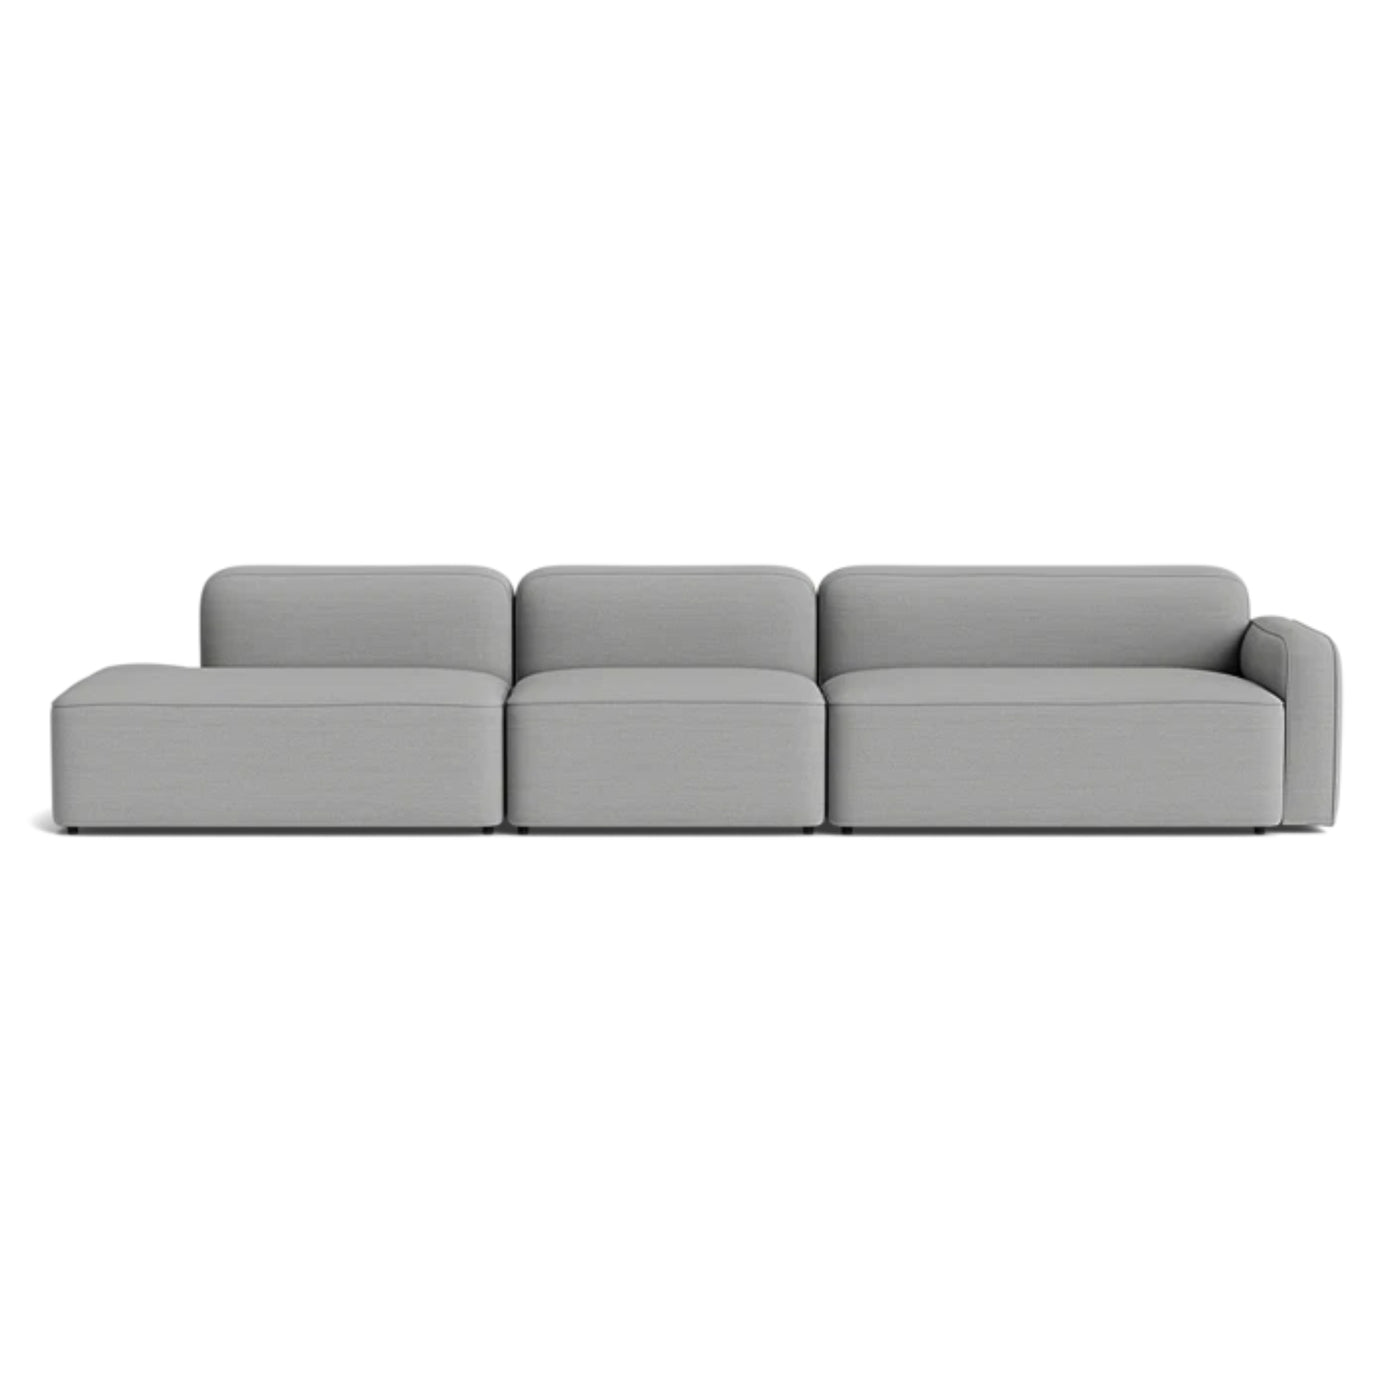 Normann Copenhagen Rope 3 Seater Modular Sofa. Made to order at someday designs. #colour_hallingdal-123